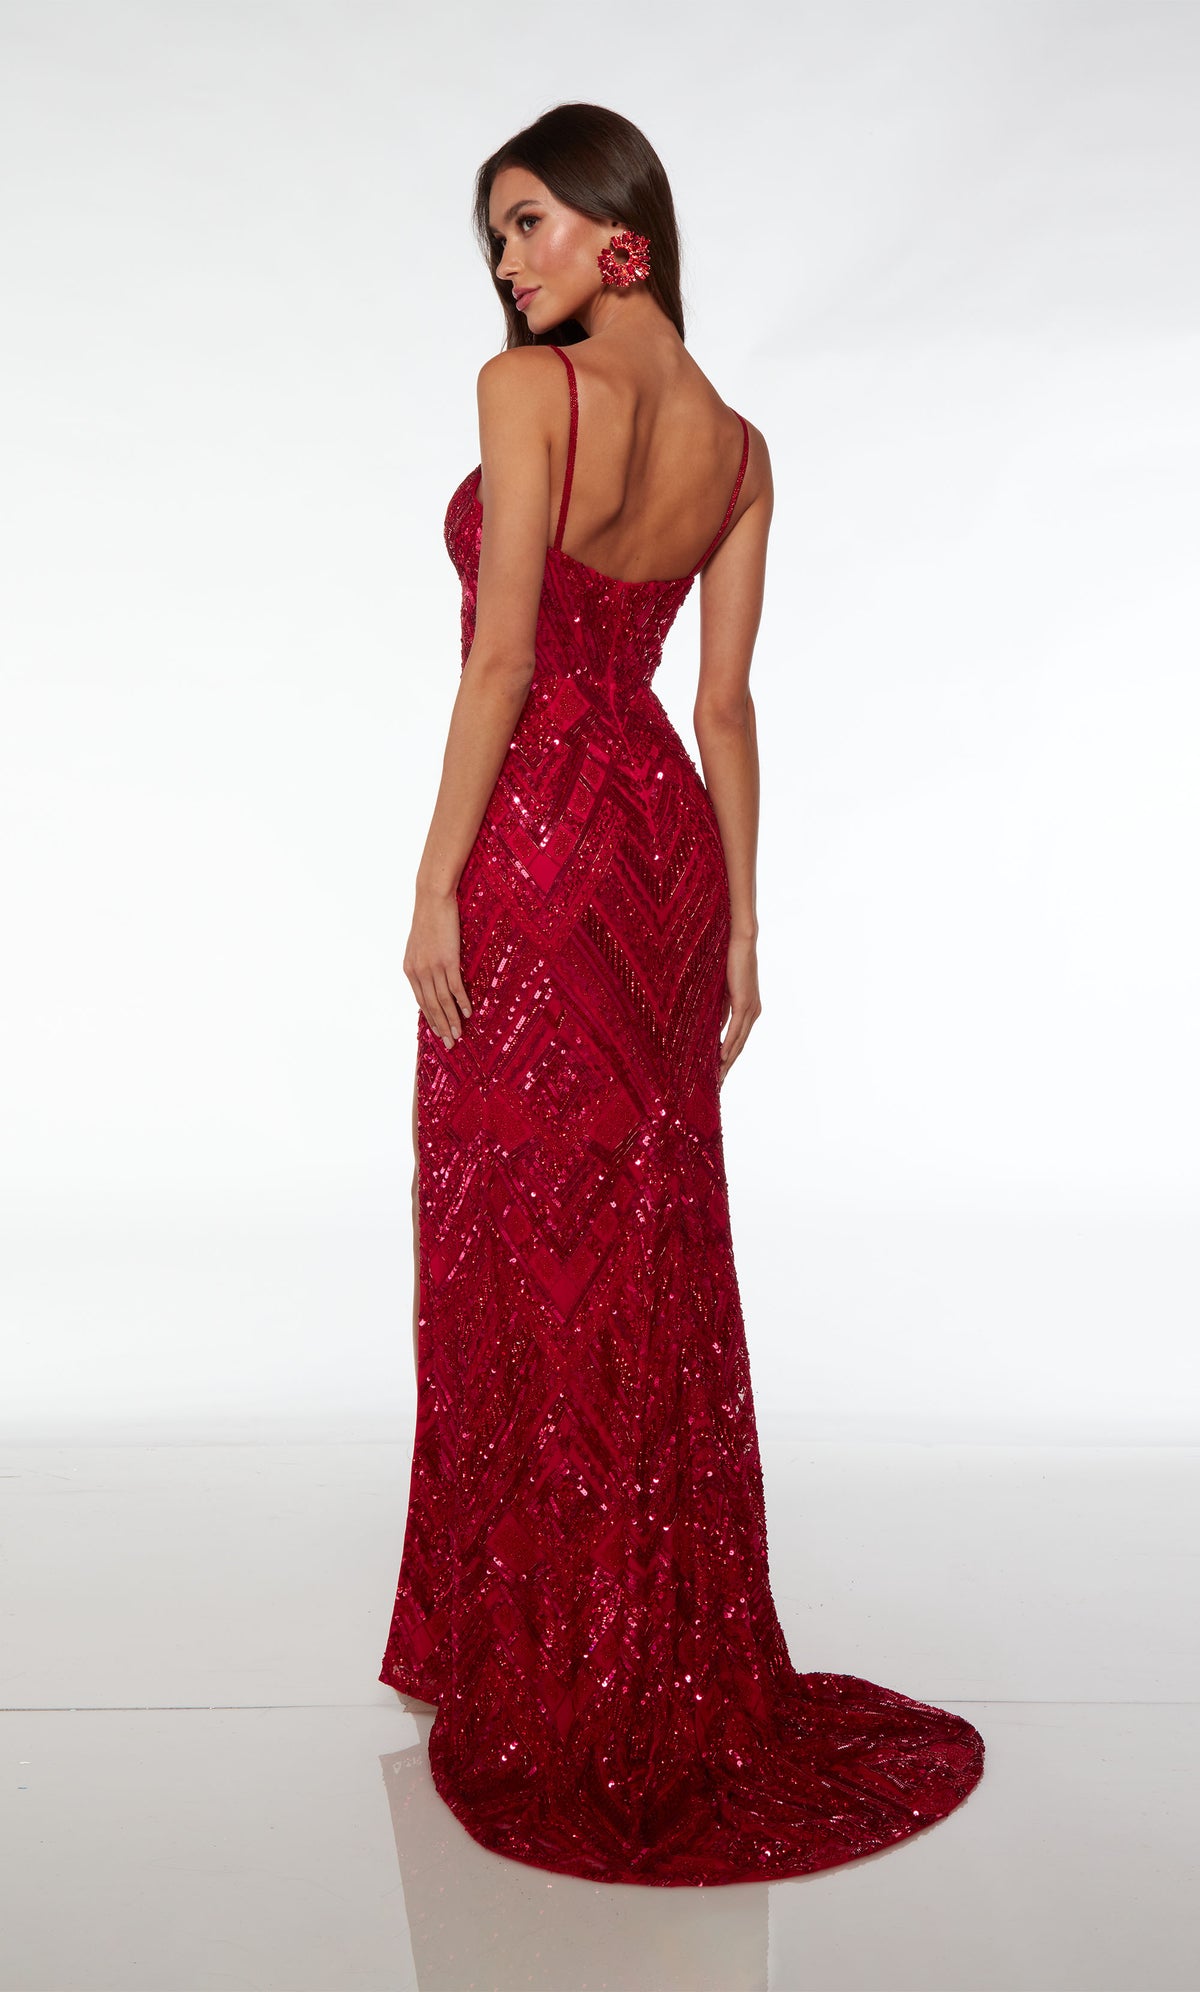 Red hand-beaded unique prom dress with intricate pattern, plunging neckline, side slit, beaded straps, and an slight train for an stylish and distinctive look.